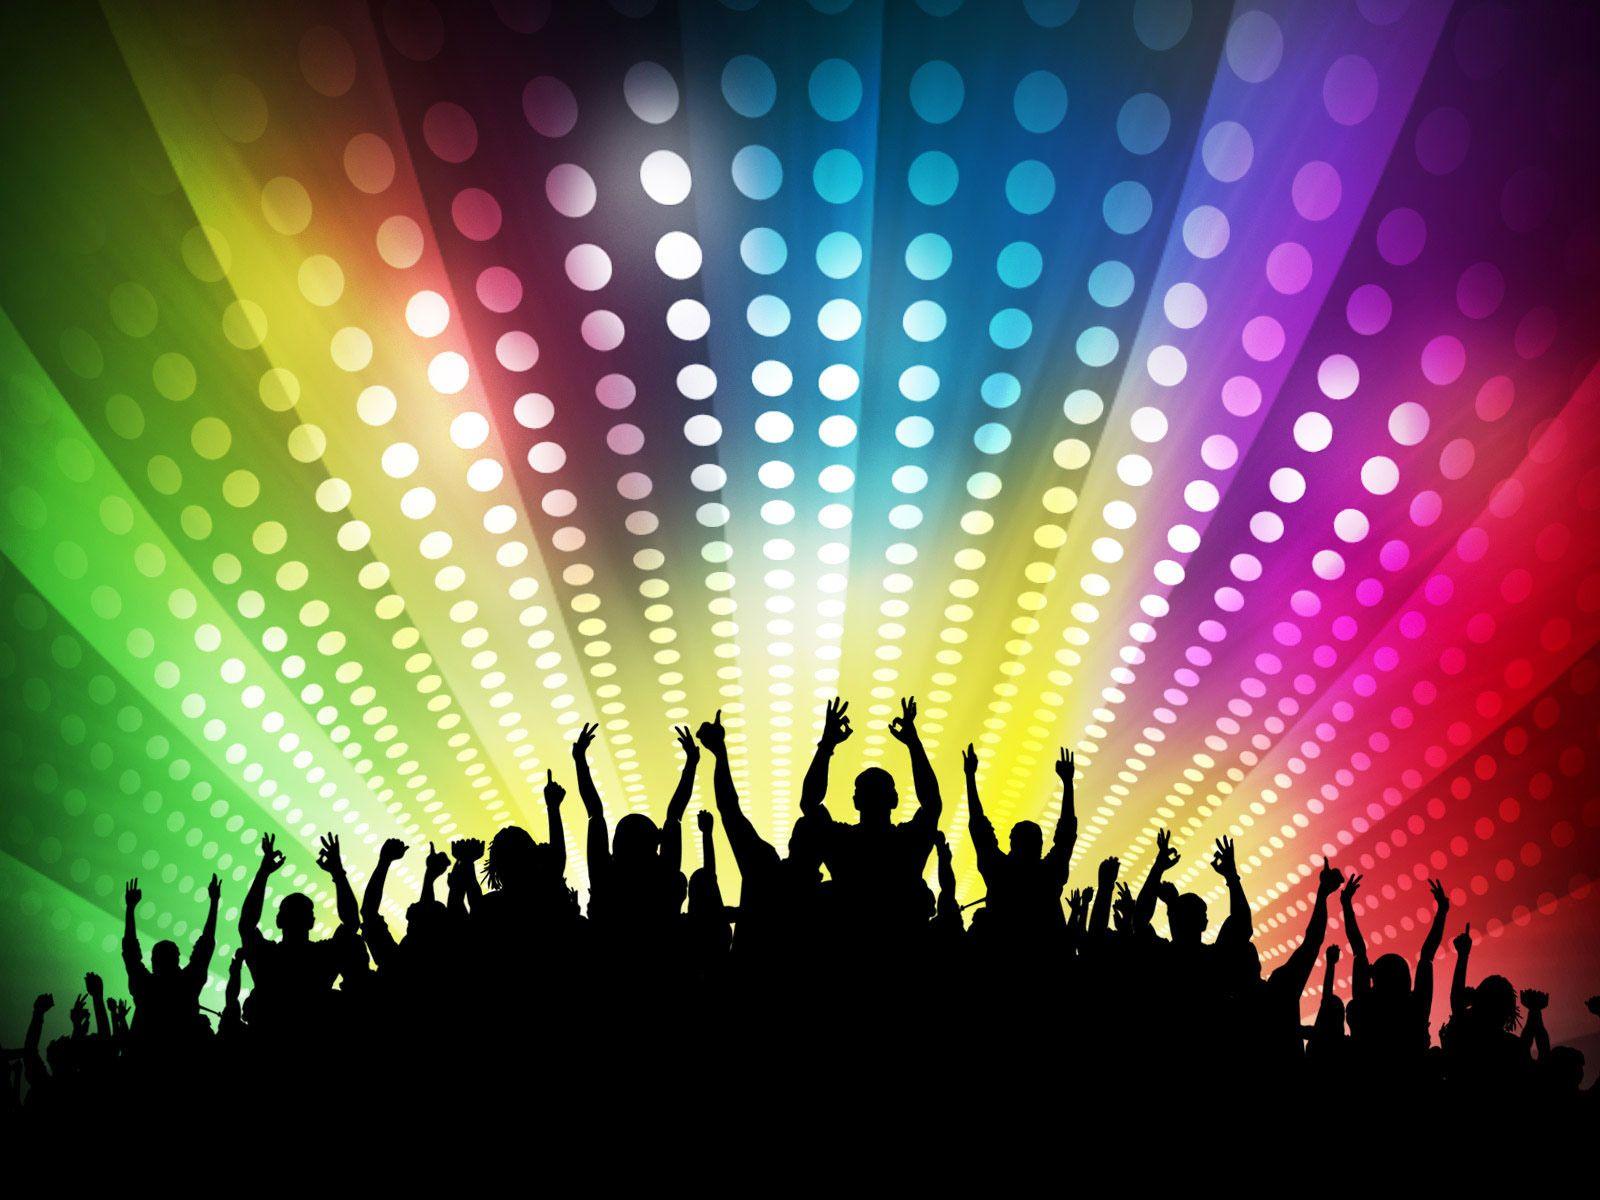 57+] Party Background Pictures - WallpaperSafari